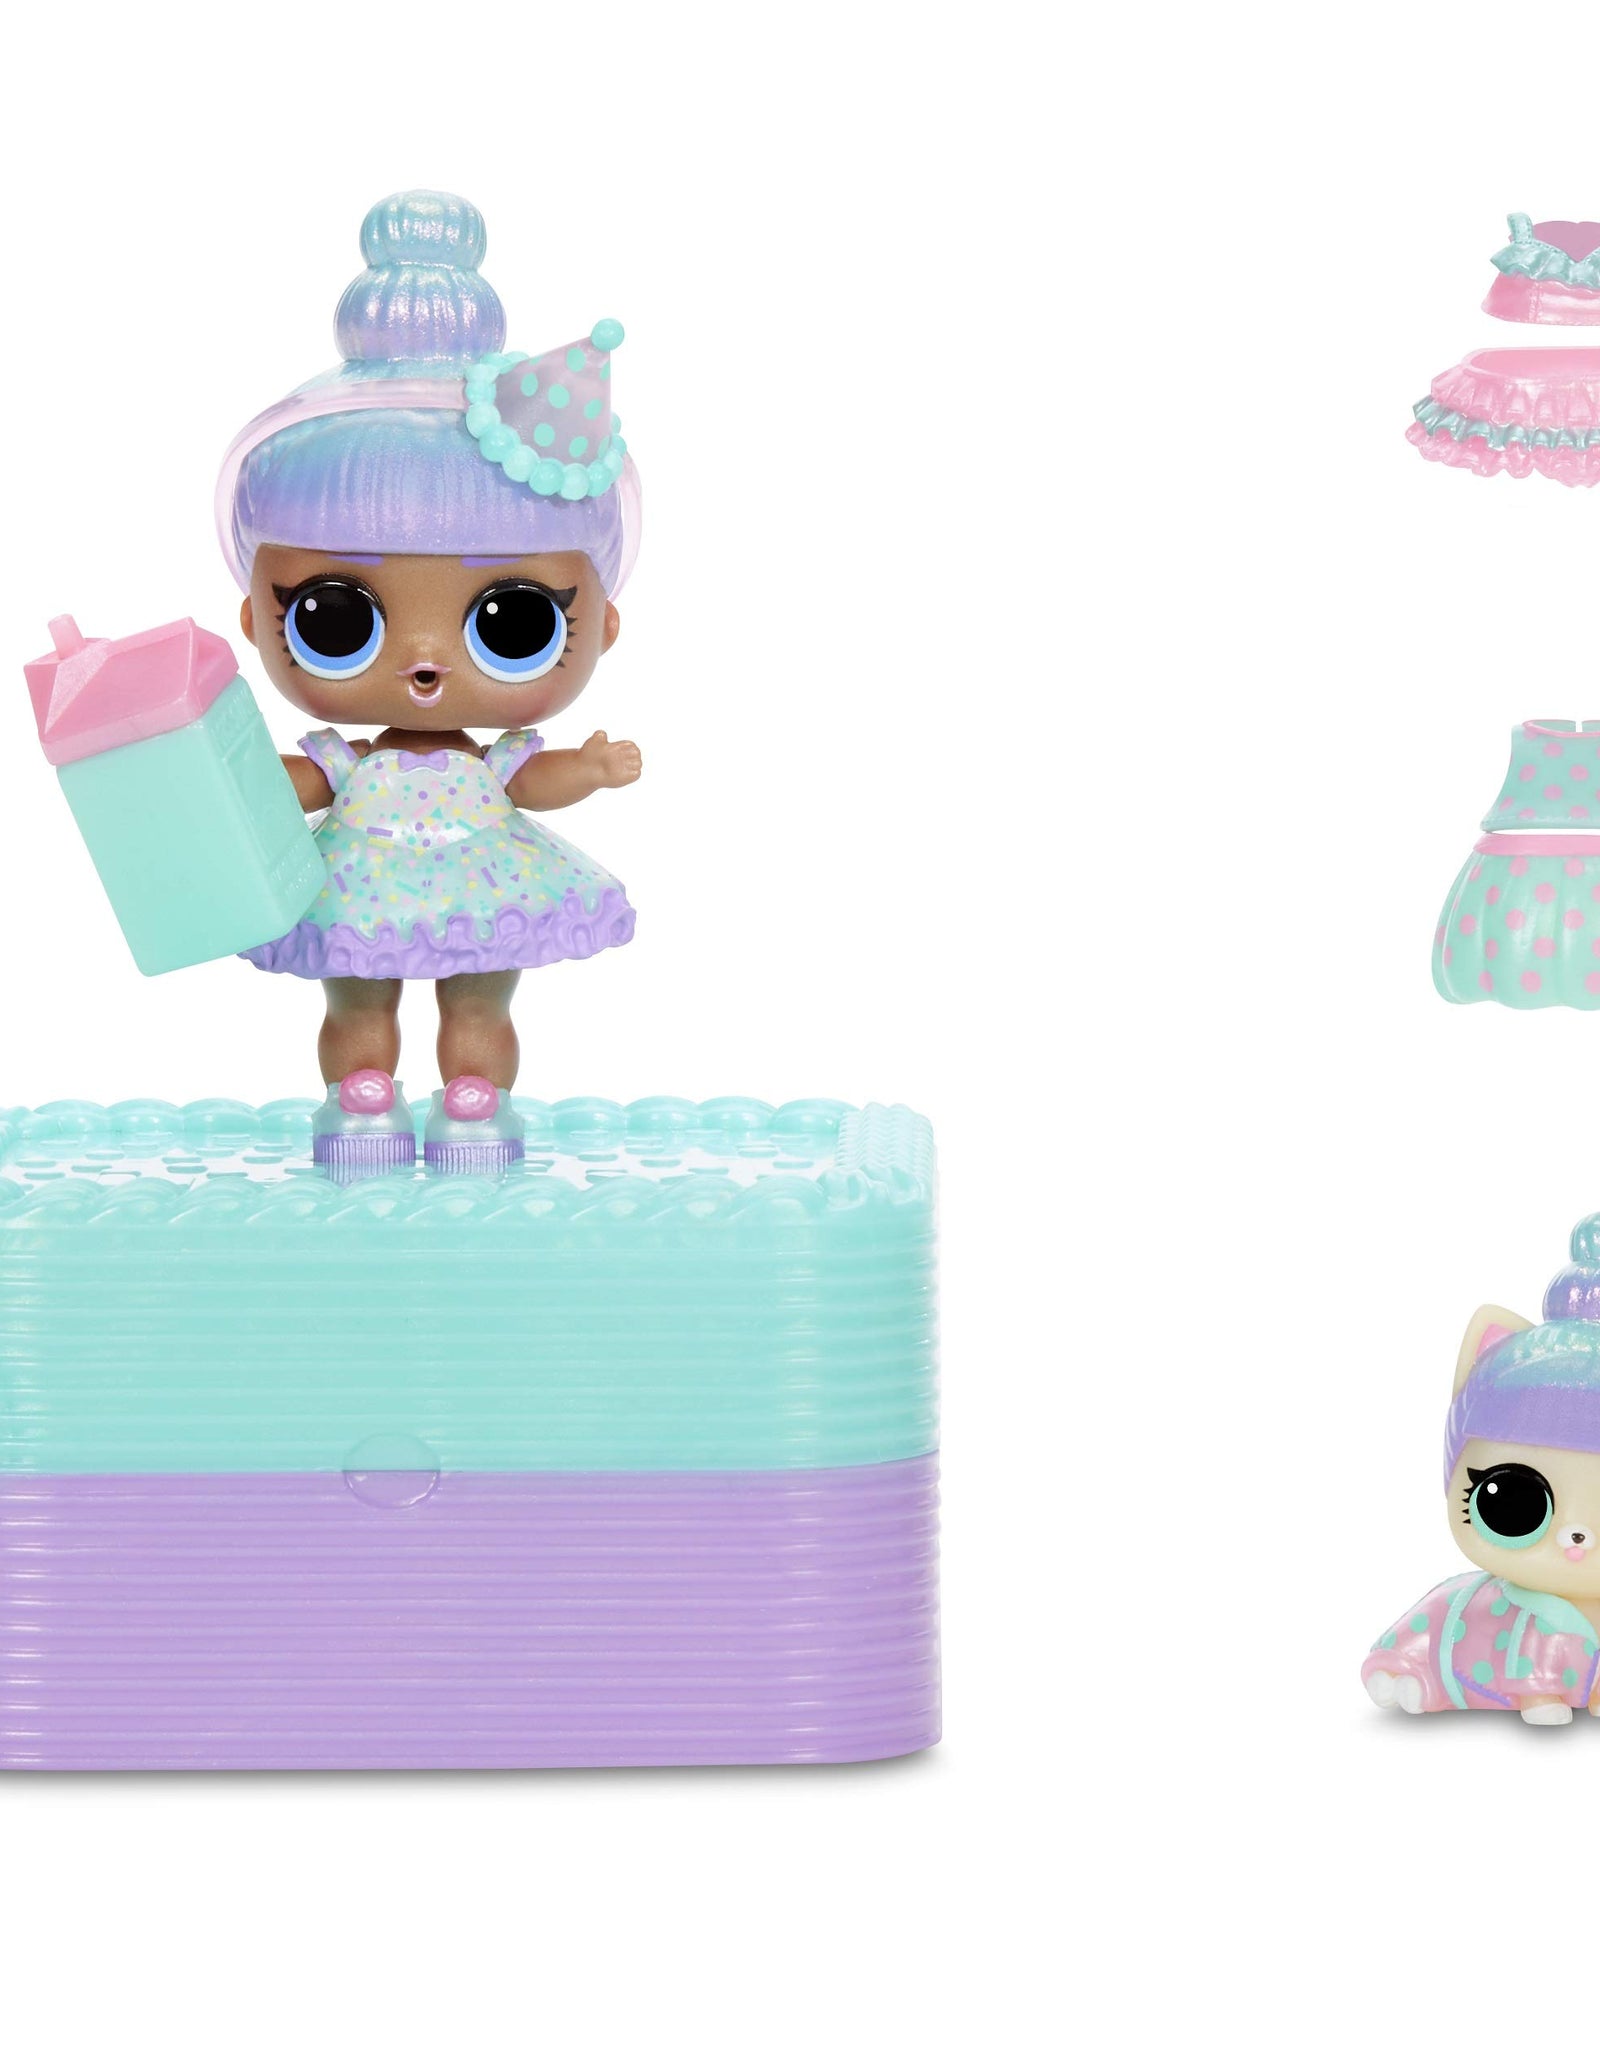 LOL Surprise Deluxe Present Surprise with Limited Edition Doll, and Pet, Teal - Adorable Fashion Doll and Colorful Doll Accessories in Giftable Packaging - Birthday Present for Girls Age 4-15 Years